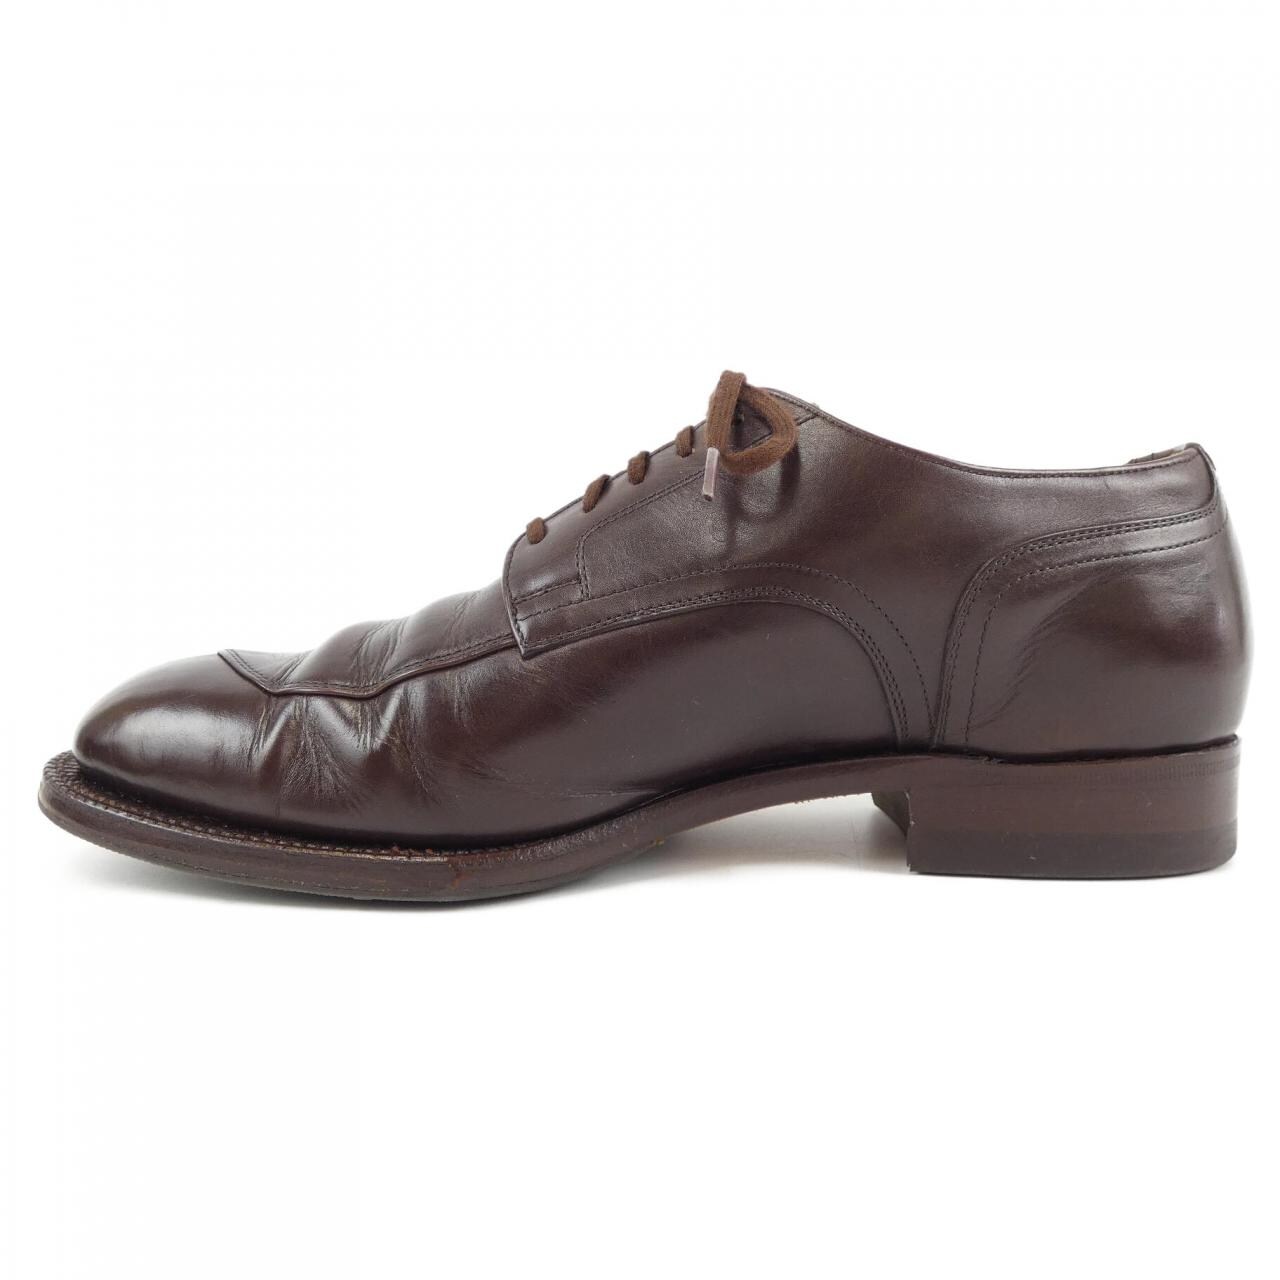 ARCHKERRY dress shoes